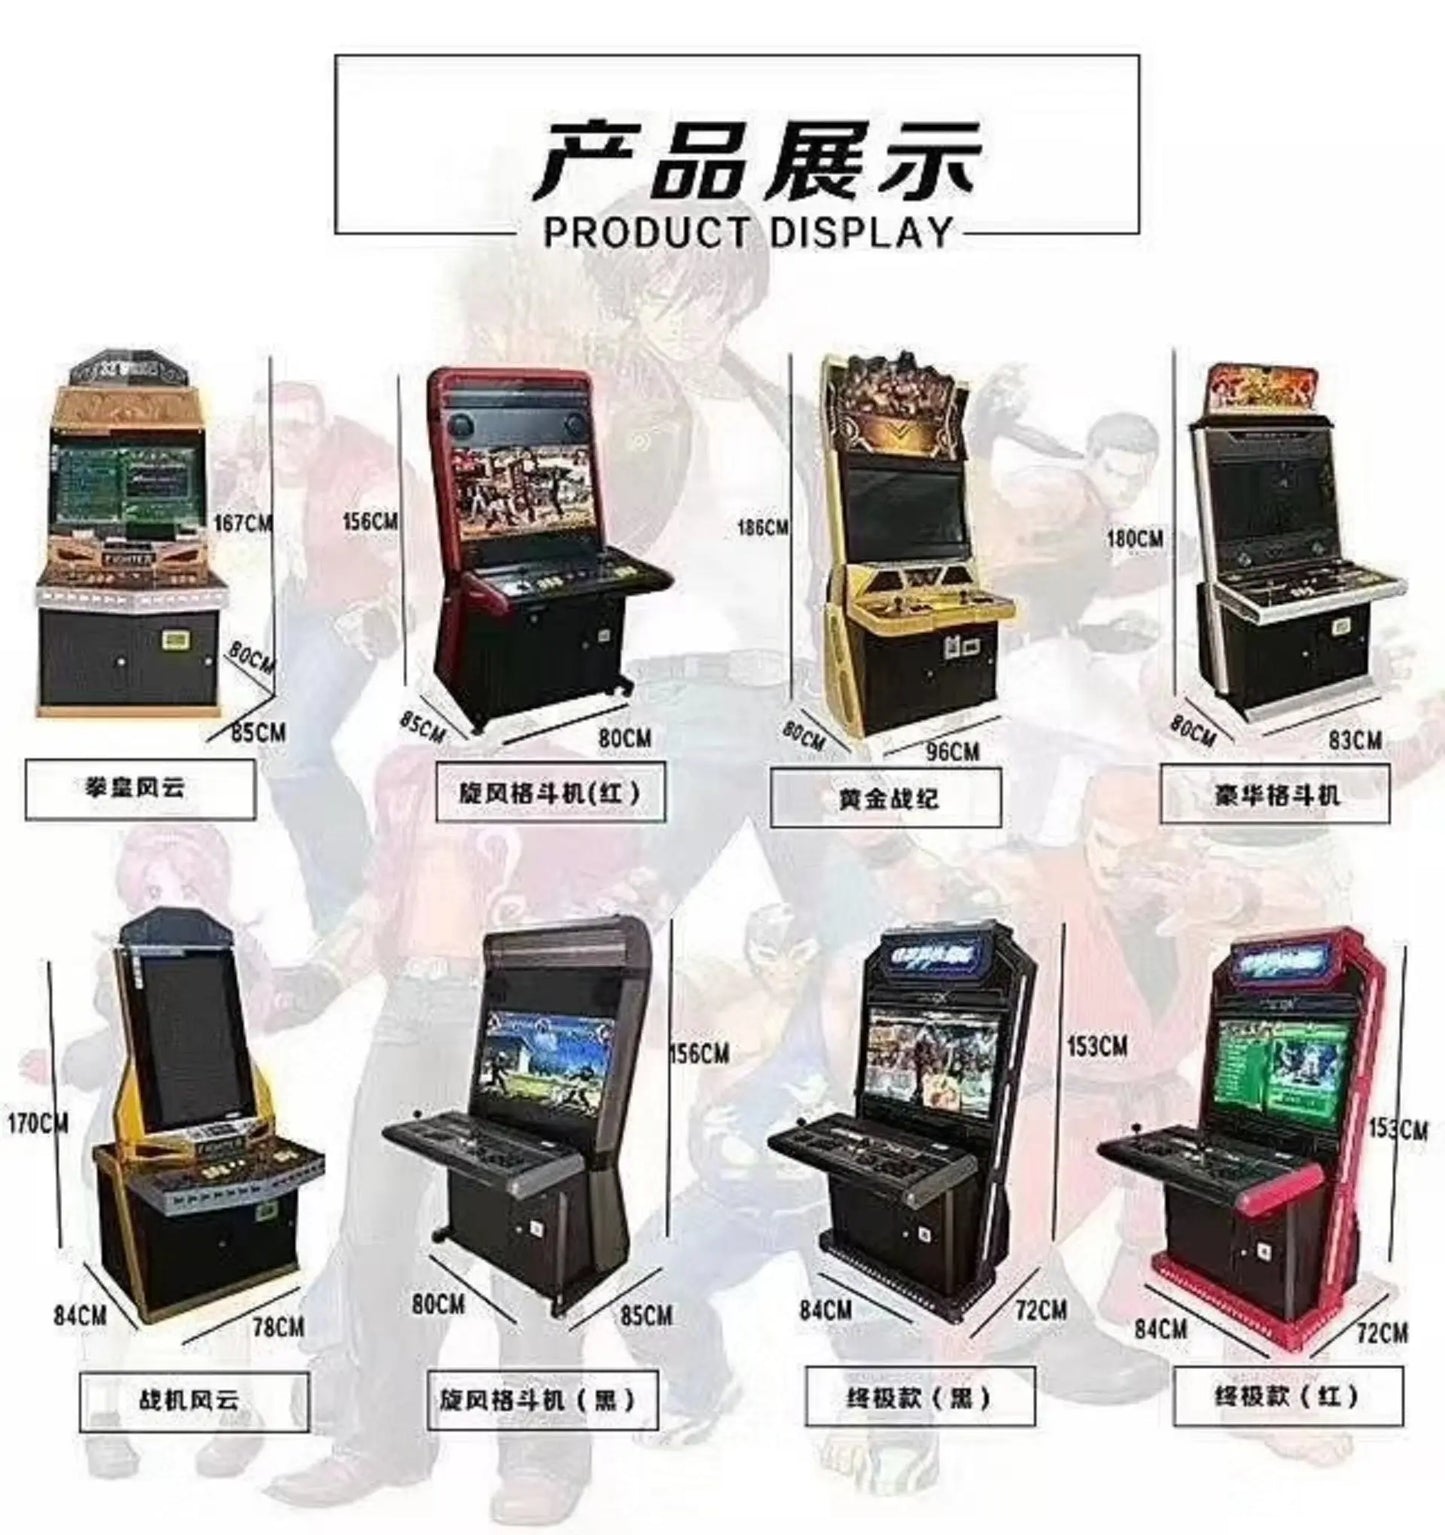 Tekken-Cabinet-Fighting-arcade-Game-Machine-China-Factory-Direct-Amusement-coin-operated-32-INCH-Video-arcade-Games-tomy-arcade